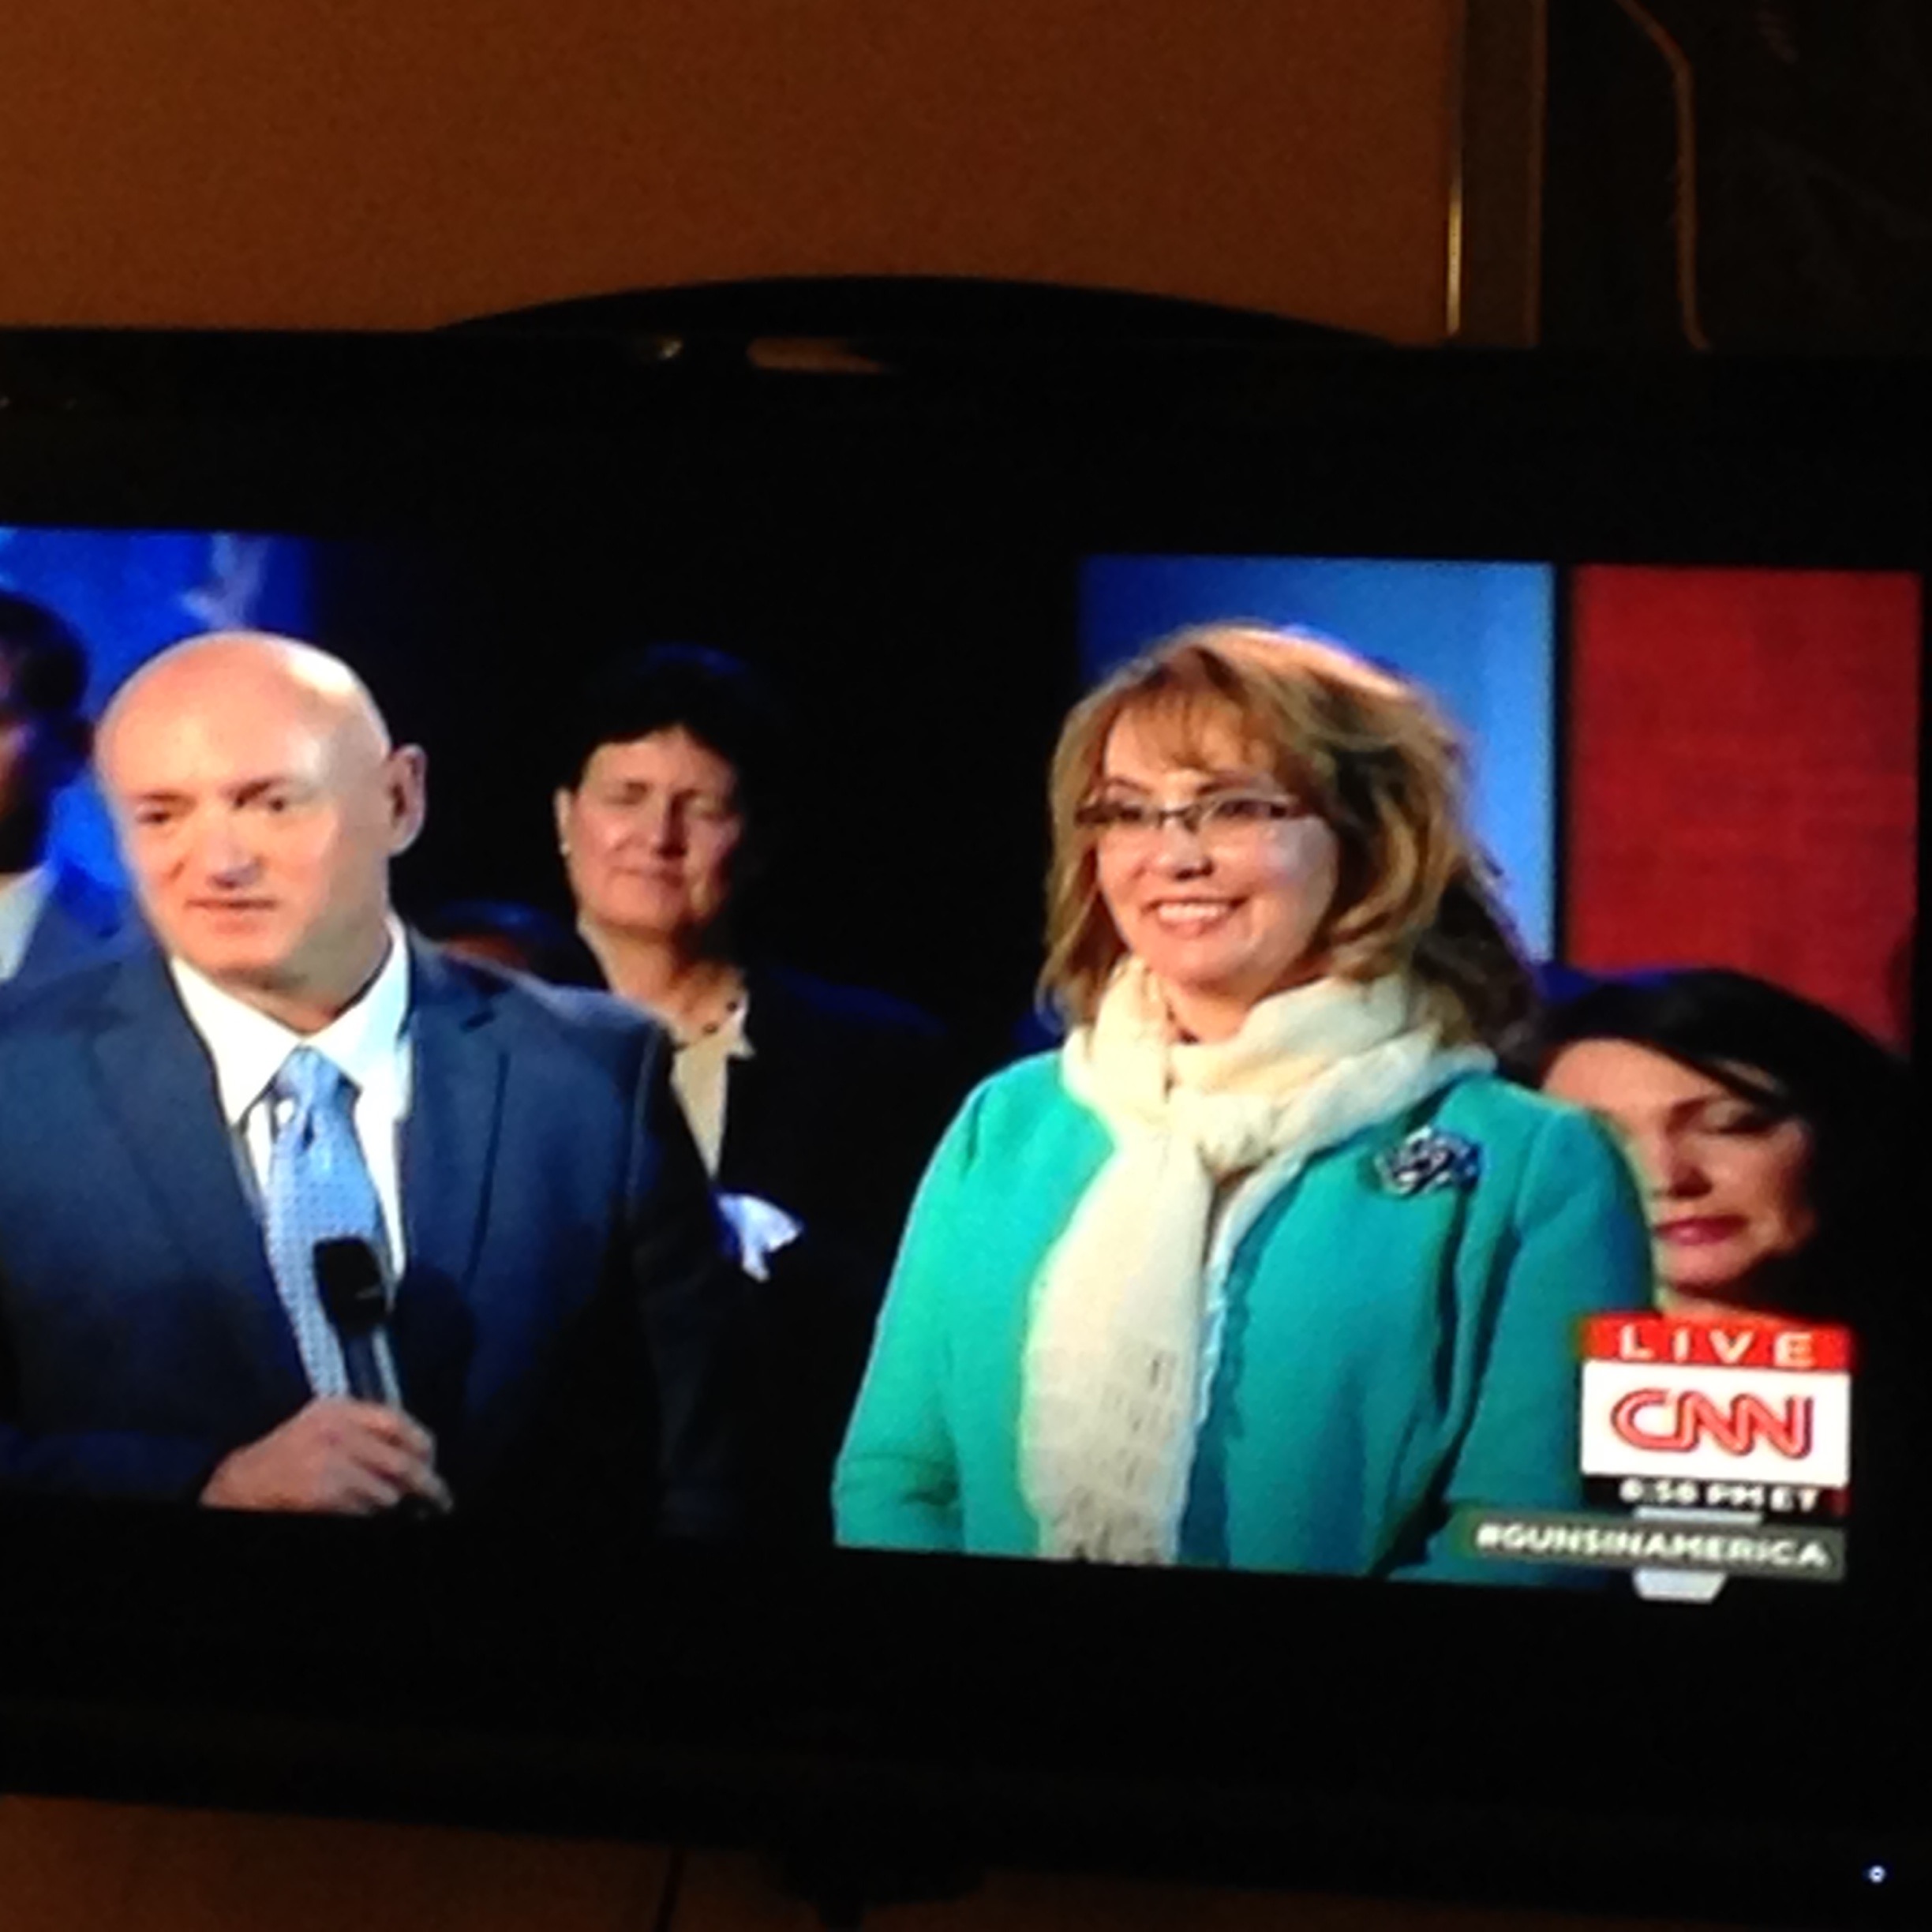 TV screen capture of Gabrielle Giffords and Mark Kelly at CNN sponsored President Obama town hall on Guns